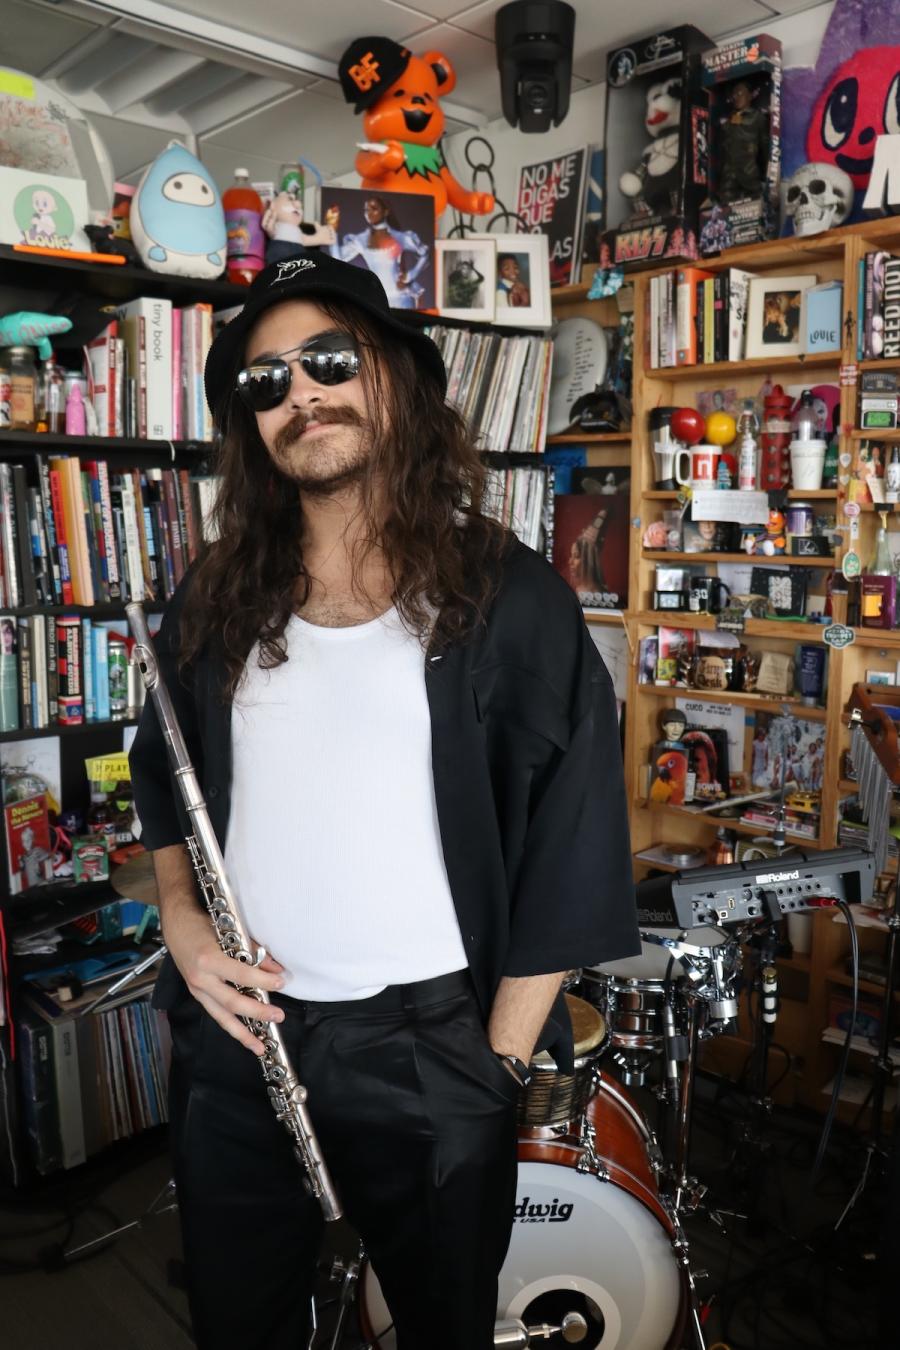 Paolo Santos holds his flute wearing sunglasses in front of the Tiny Desk set at NPR.